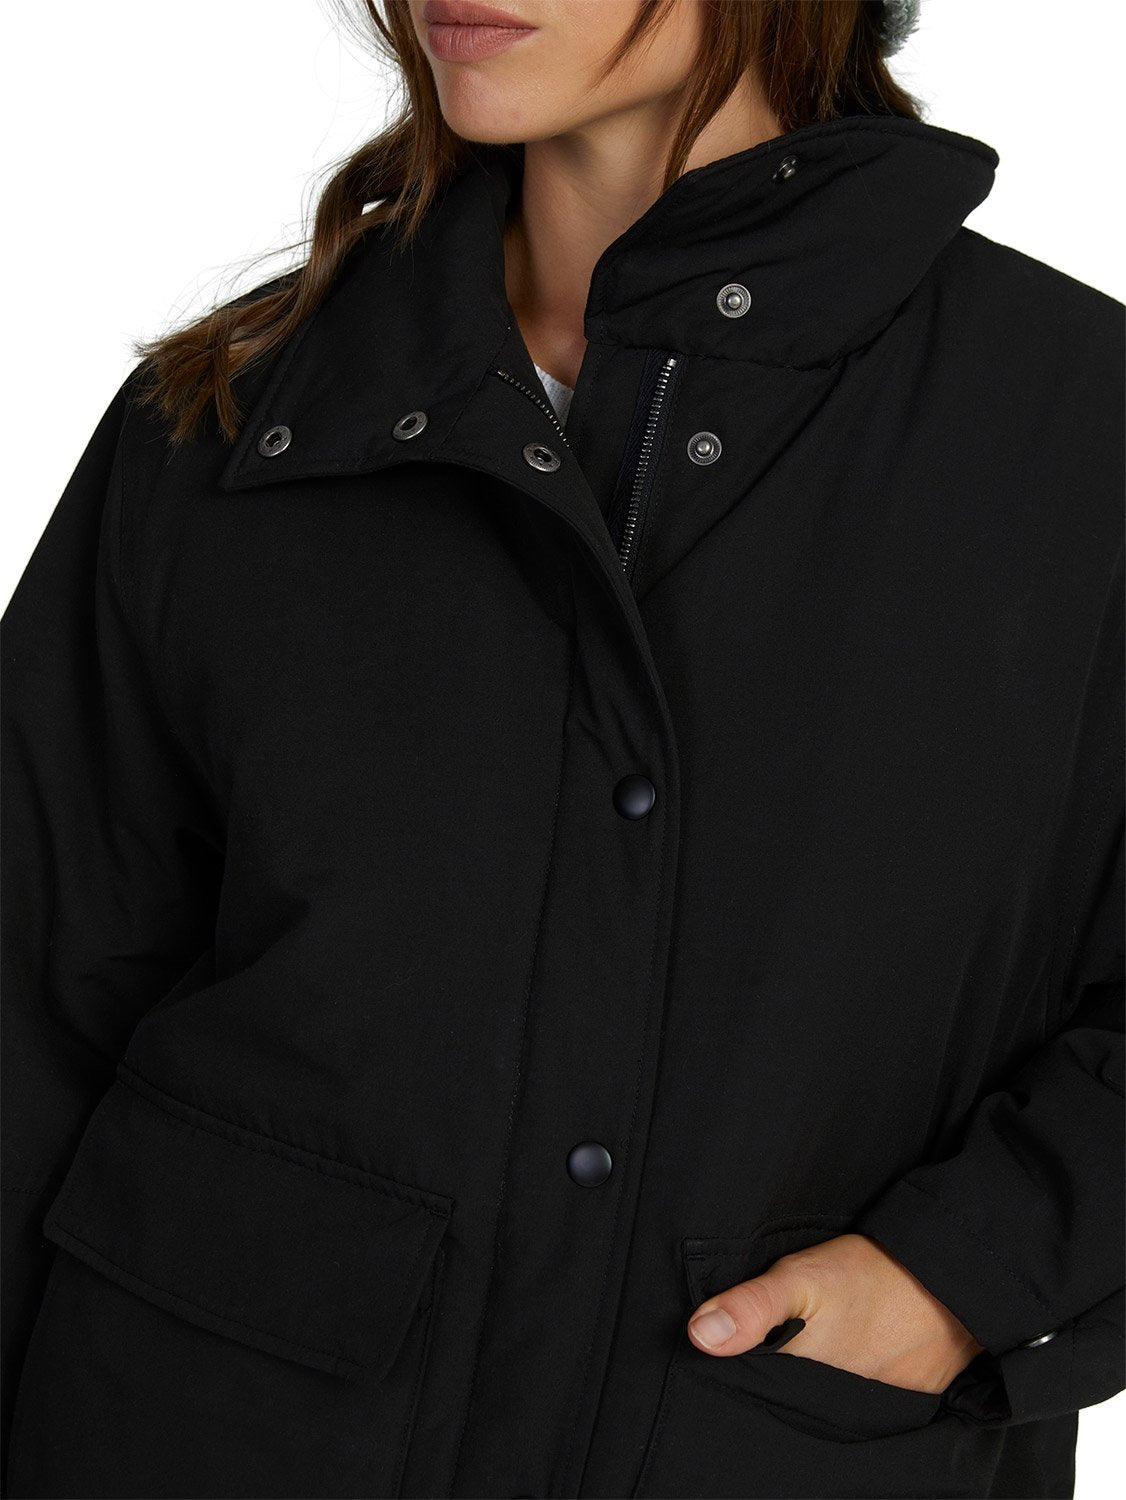 Roxy Ladies This Time Puffer Jacket